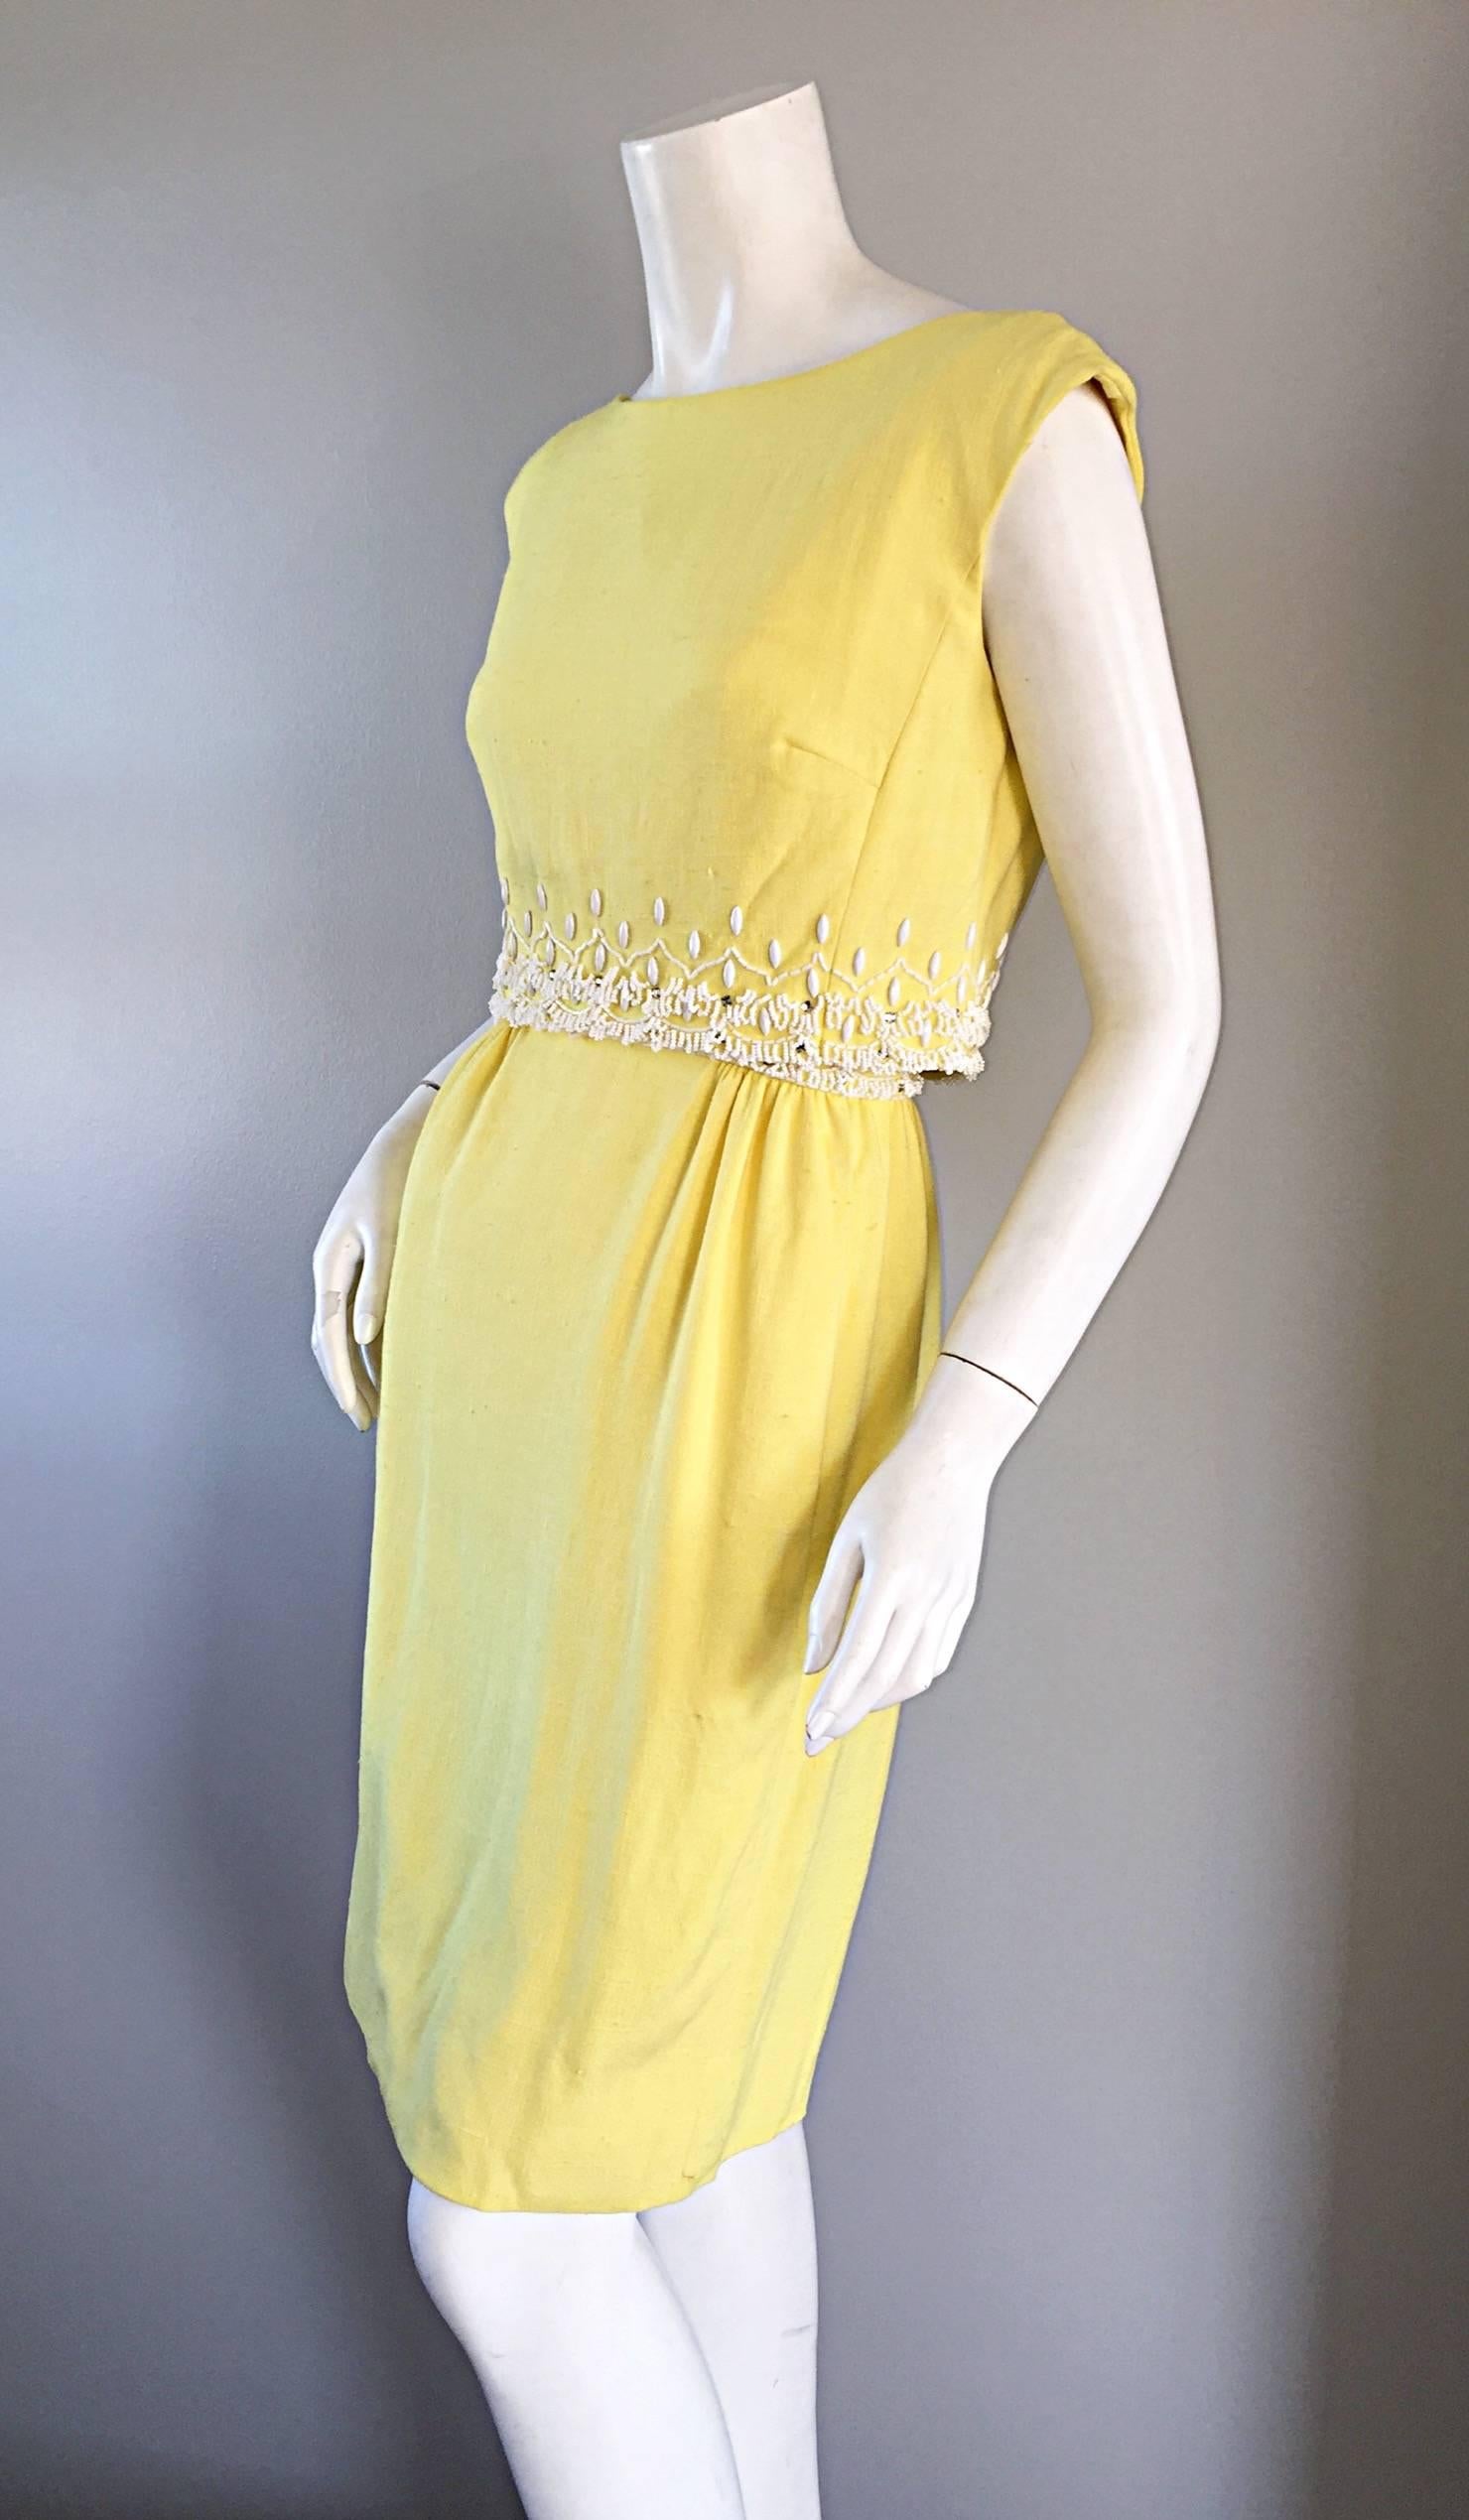 Women's 1960s Malcolm Starr Yellow Beaded + Rhinestone Vintage 60s Dress And Crop Top